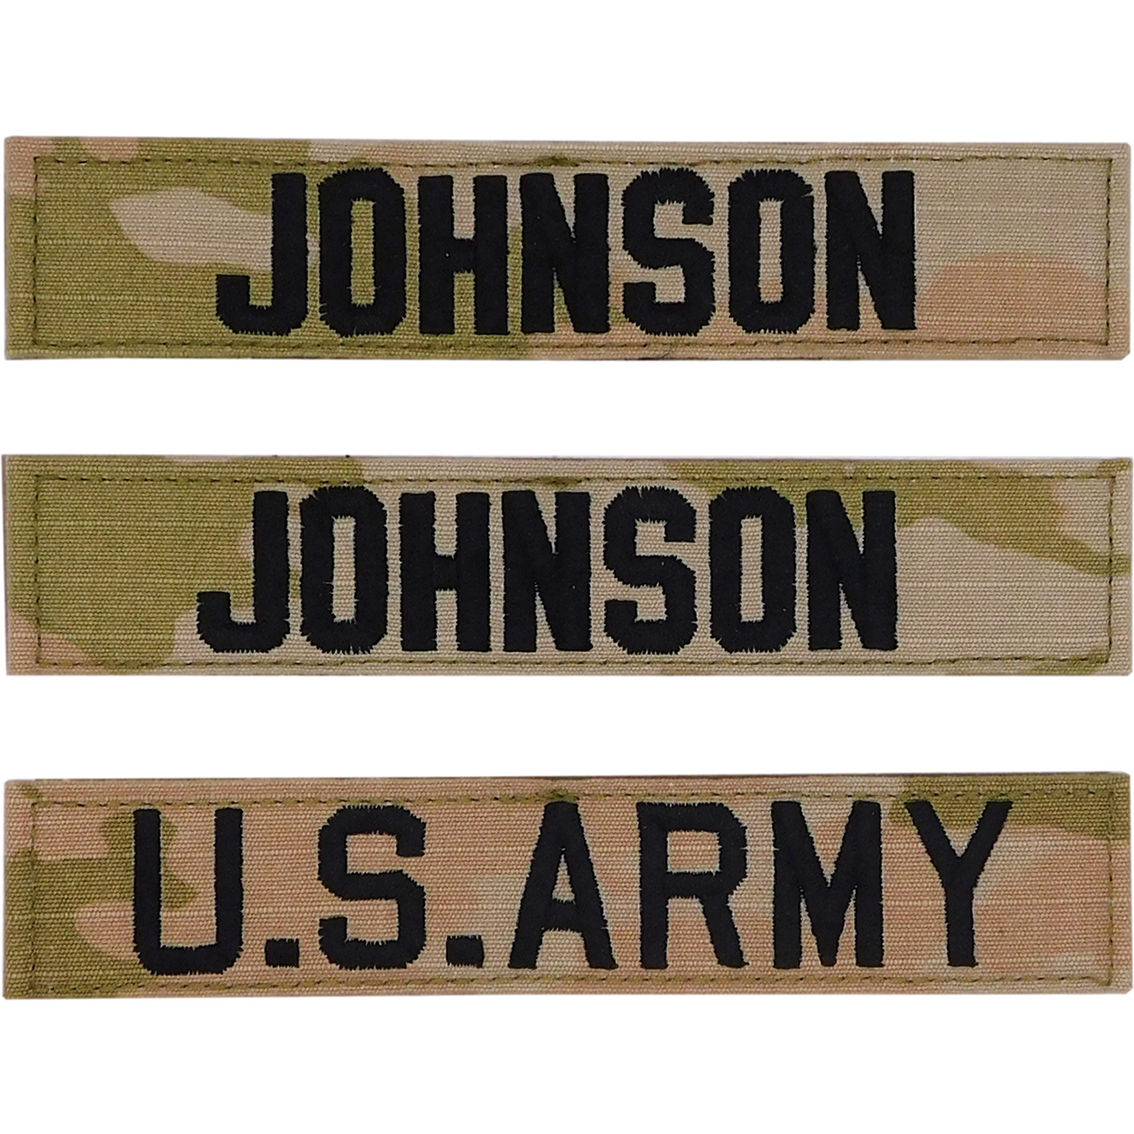 Embroidered Army Ocp Nametape Kit With Velcro (uniform Builder Item